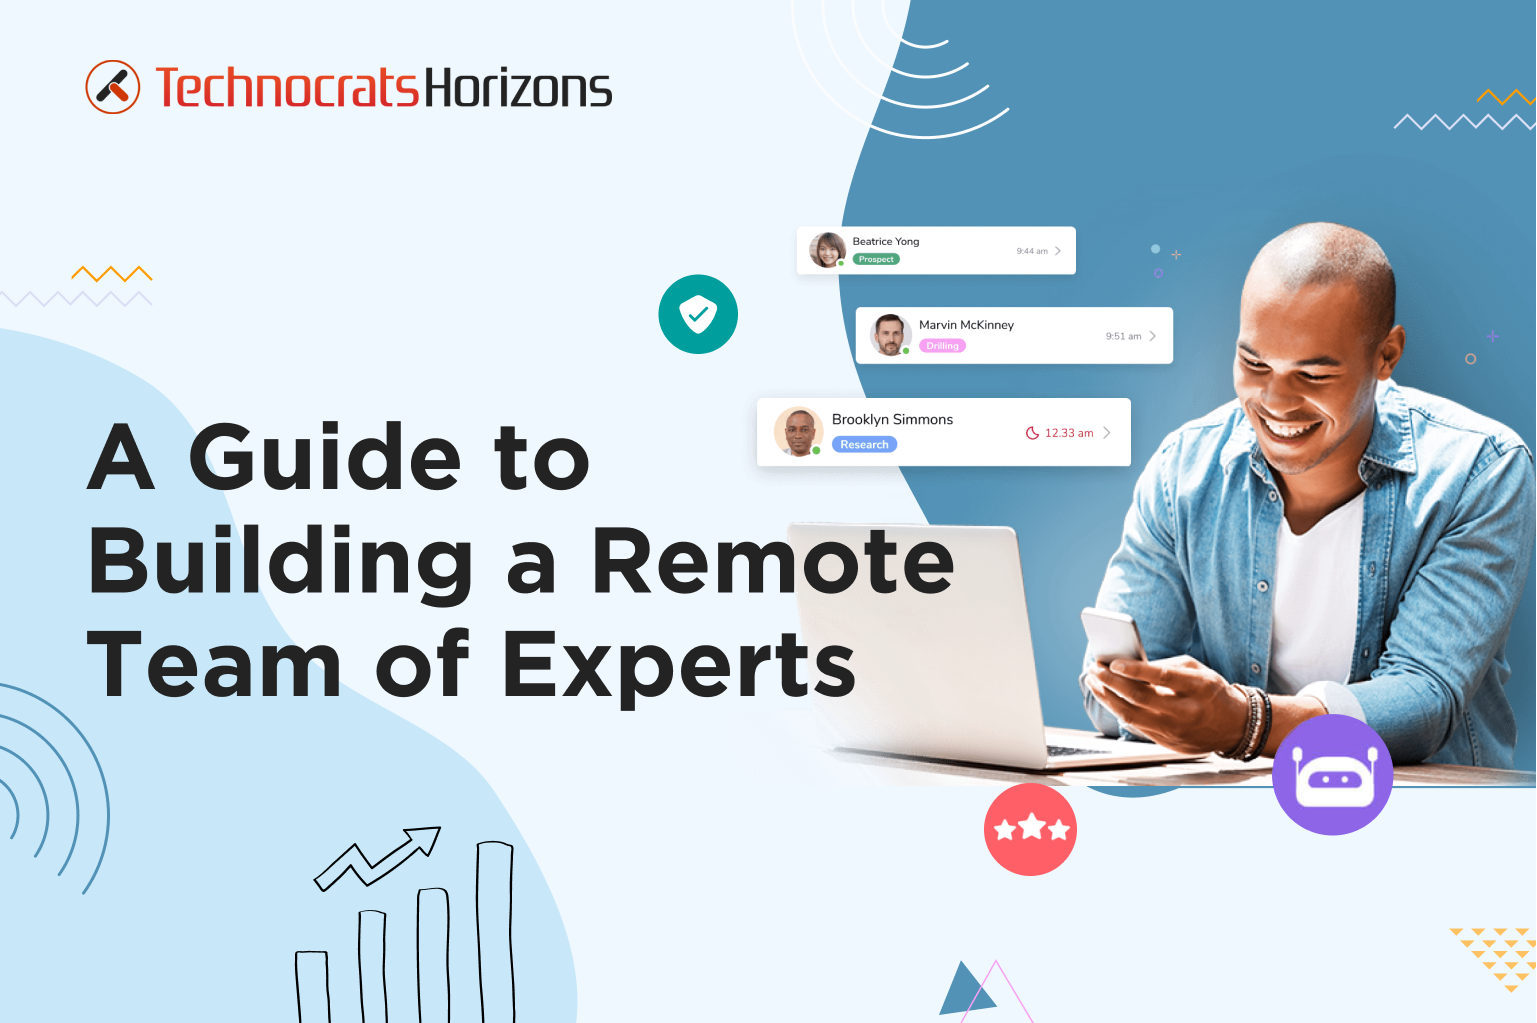 Offshore Development Teams: How to Build and Scale a Remote Team of Expert Developers